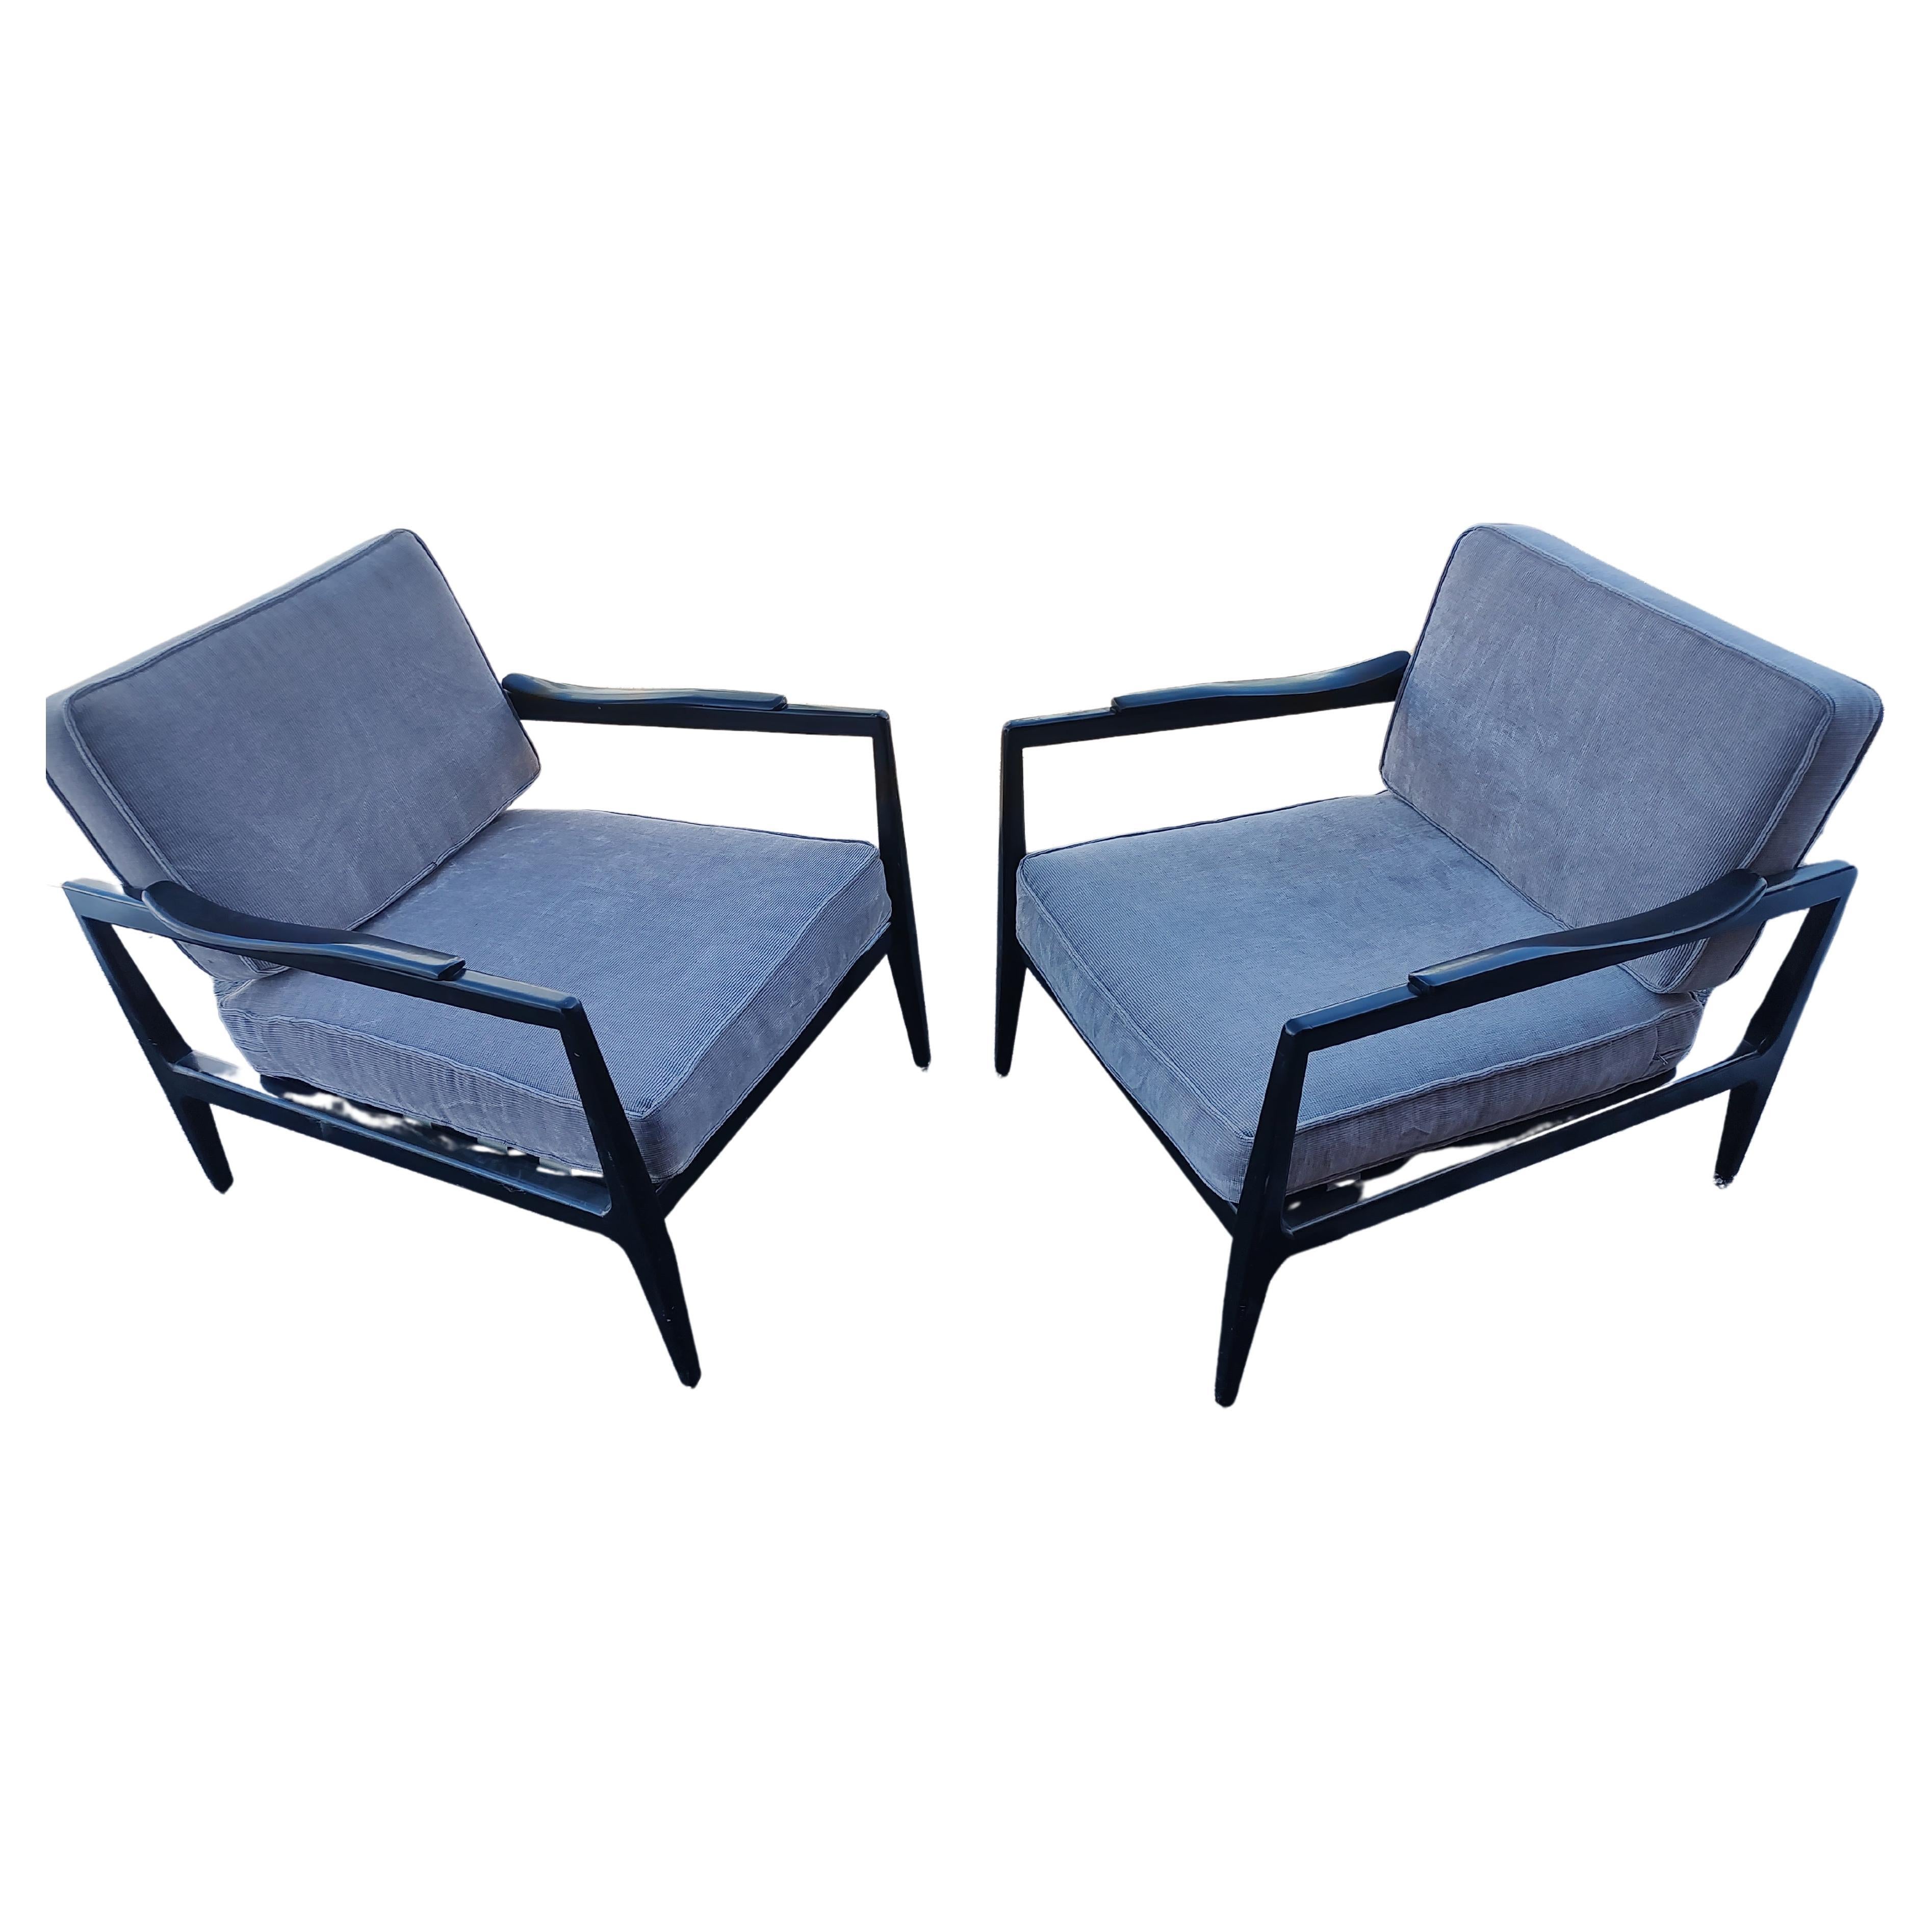 Pair of Mid Century Modern Sculptural Lounge Chairs by Edmond Spence For Sale 1